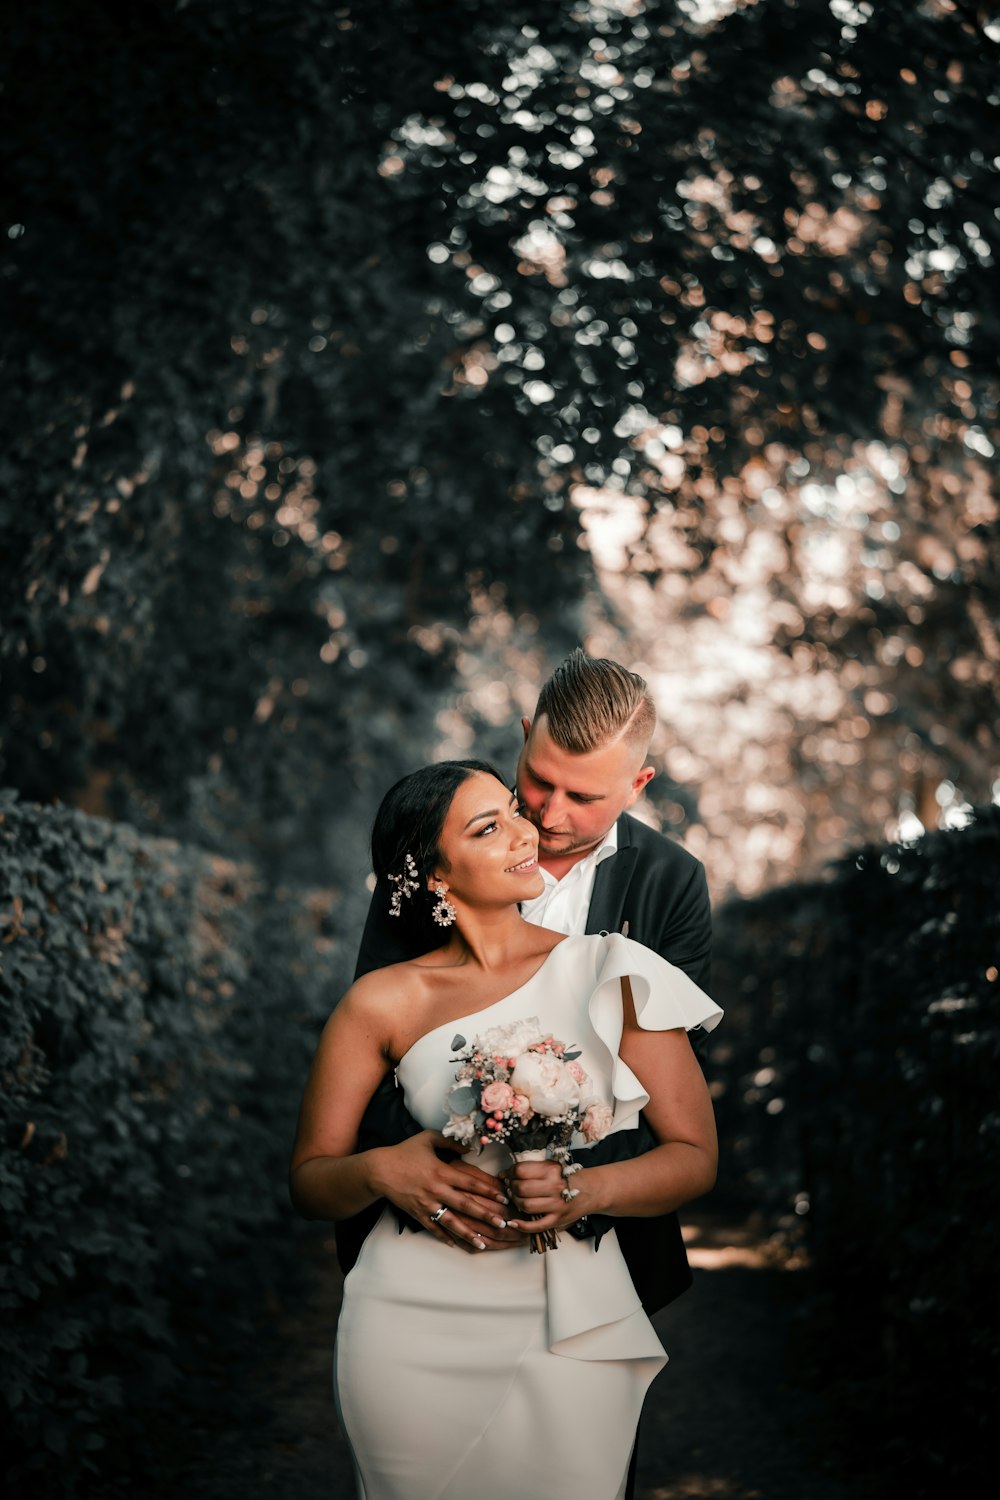 man hugging woman in white dress from behind between plants